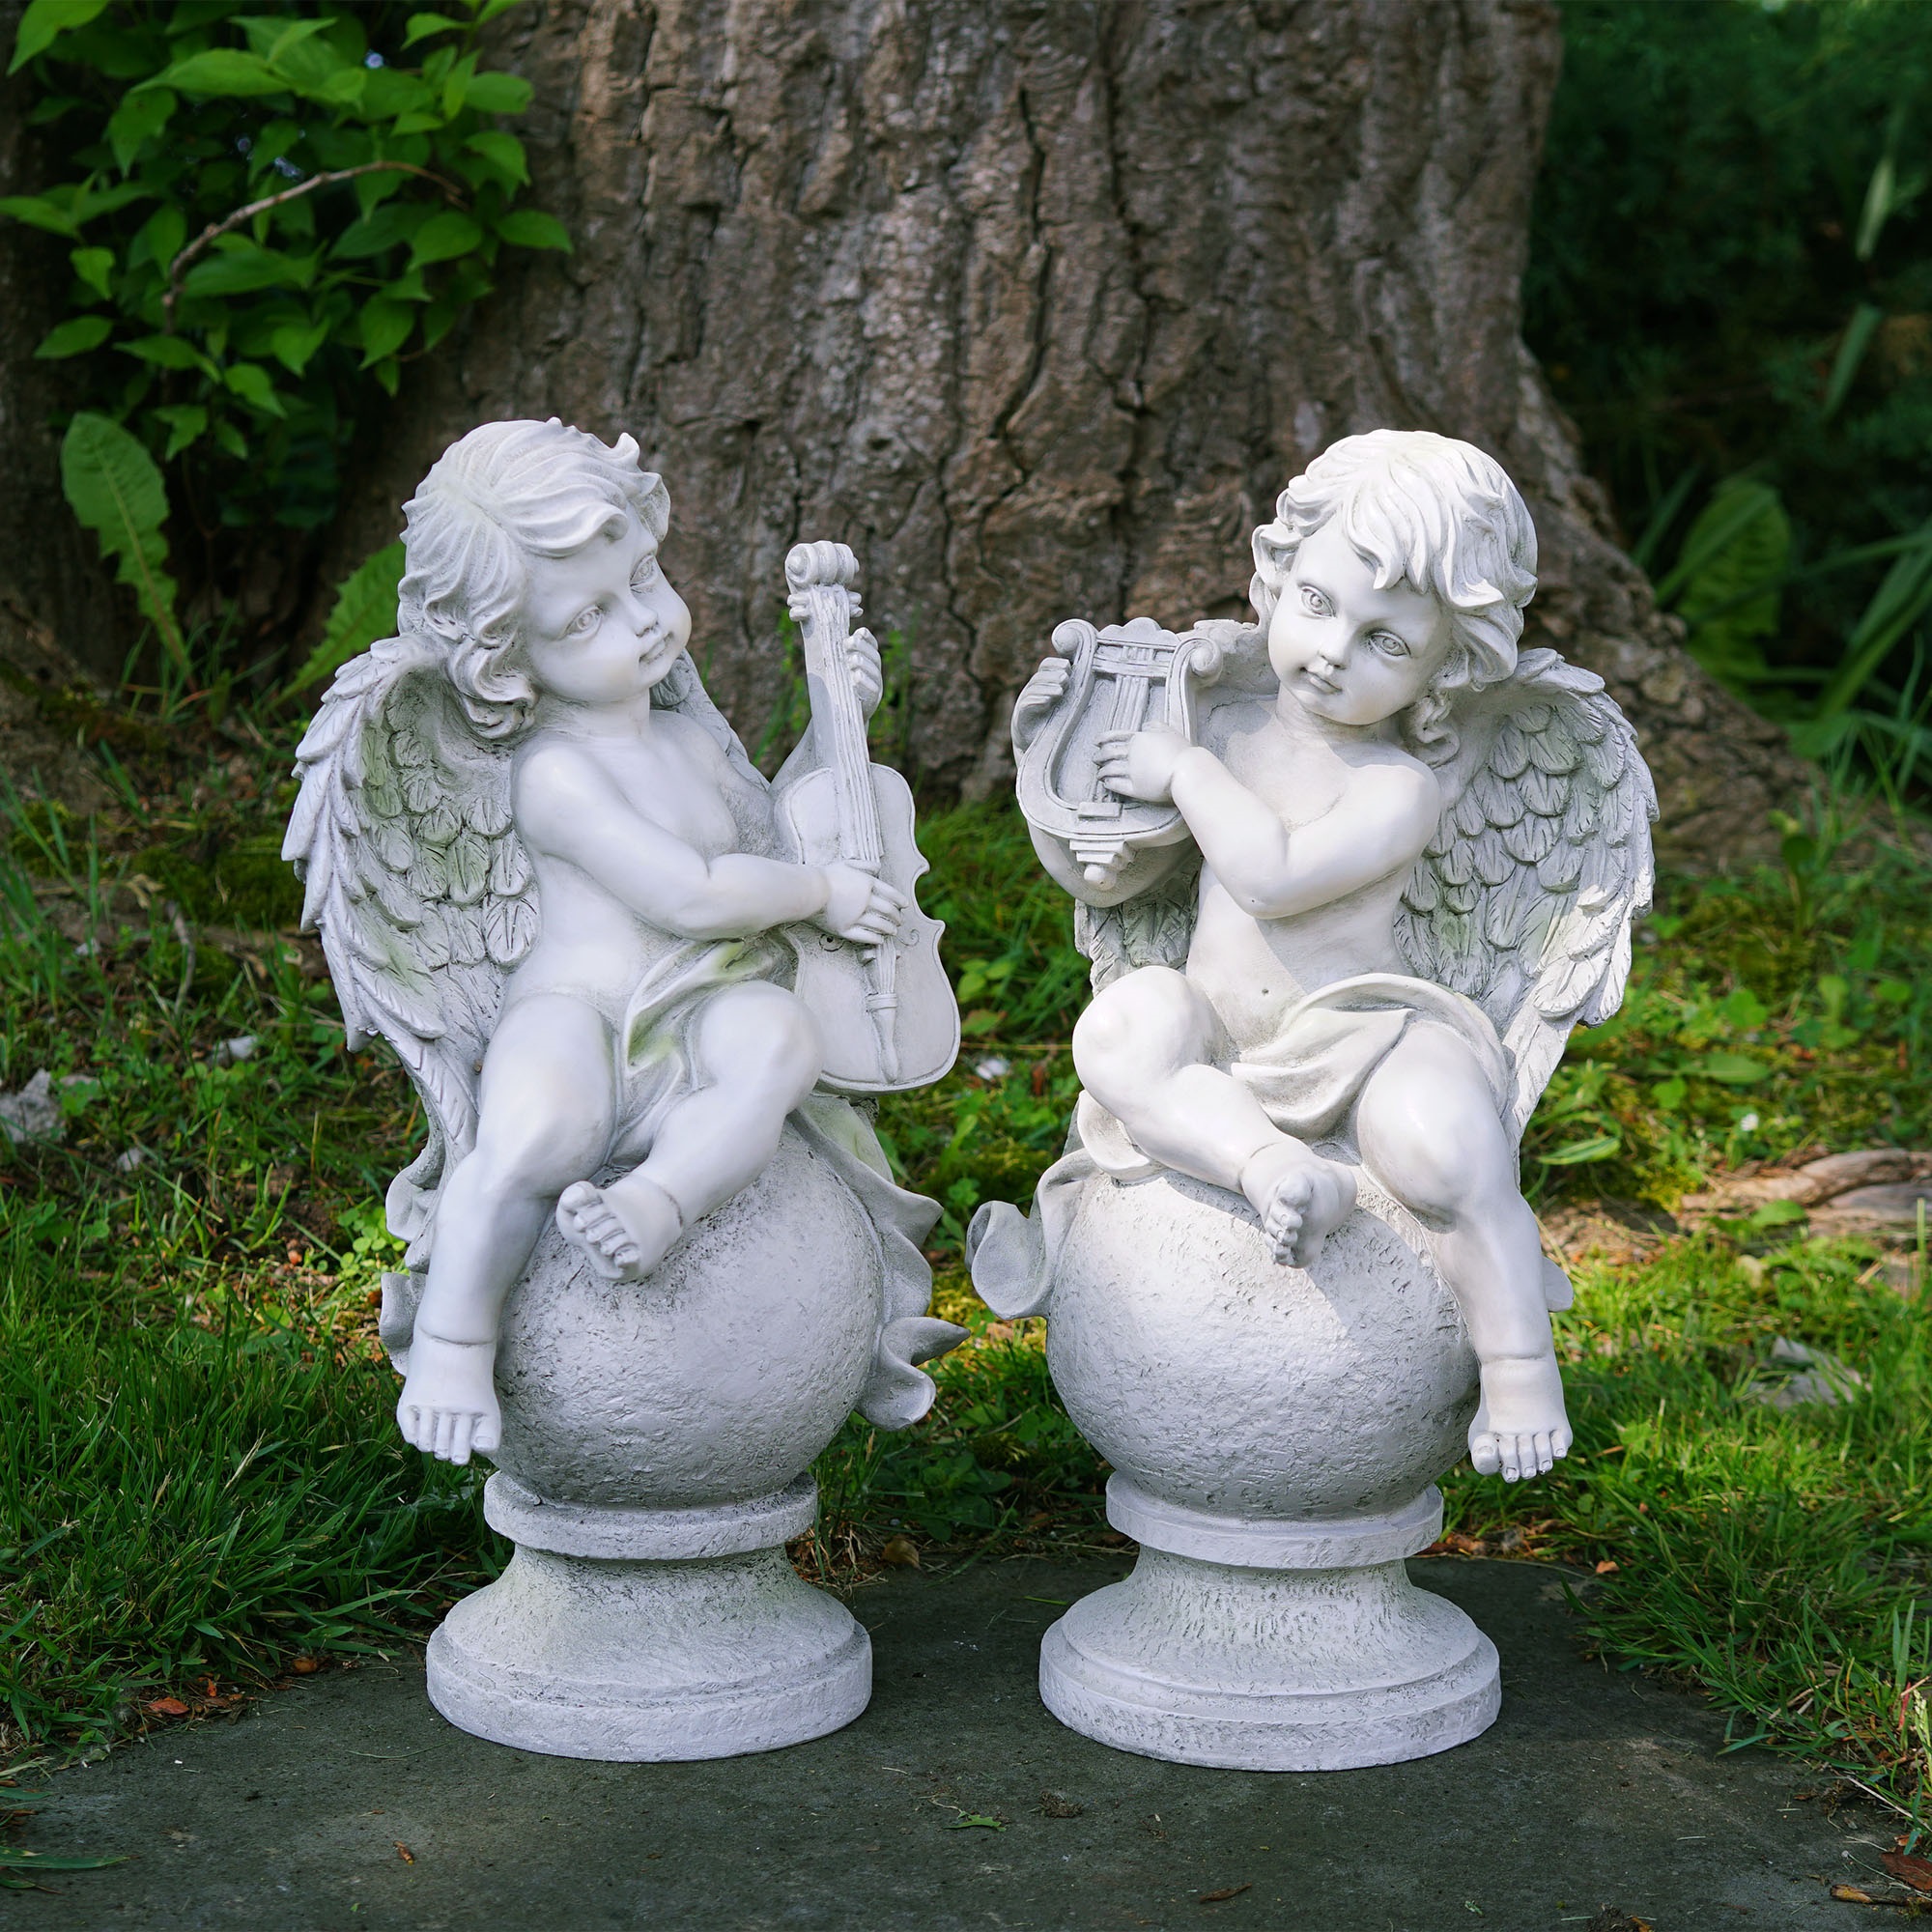 Northlight Set of 2 Cherub Angels with Instruments Sitting Outdoor Patio Garden Statues 14.75" - - image 2 of 2